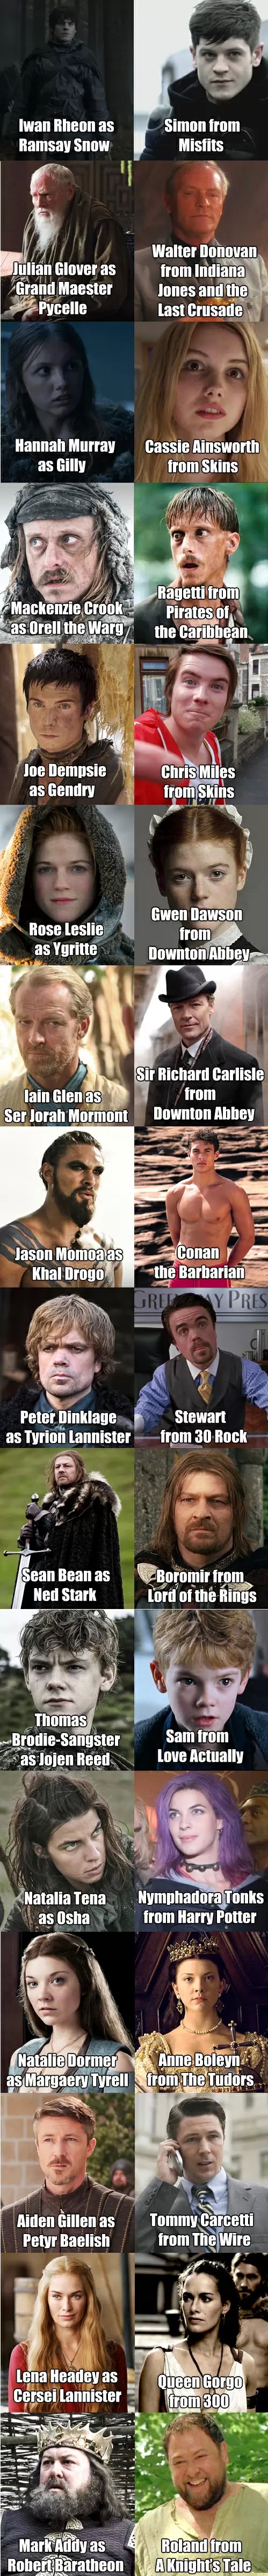 actors, actresses, game of thrones, other shows